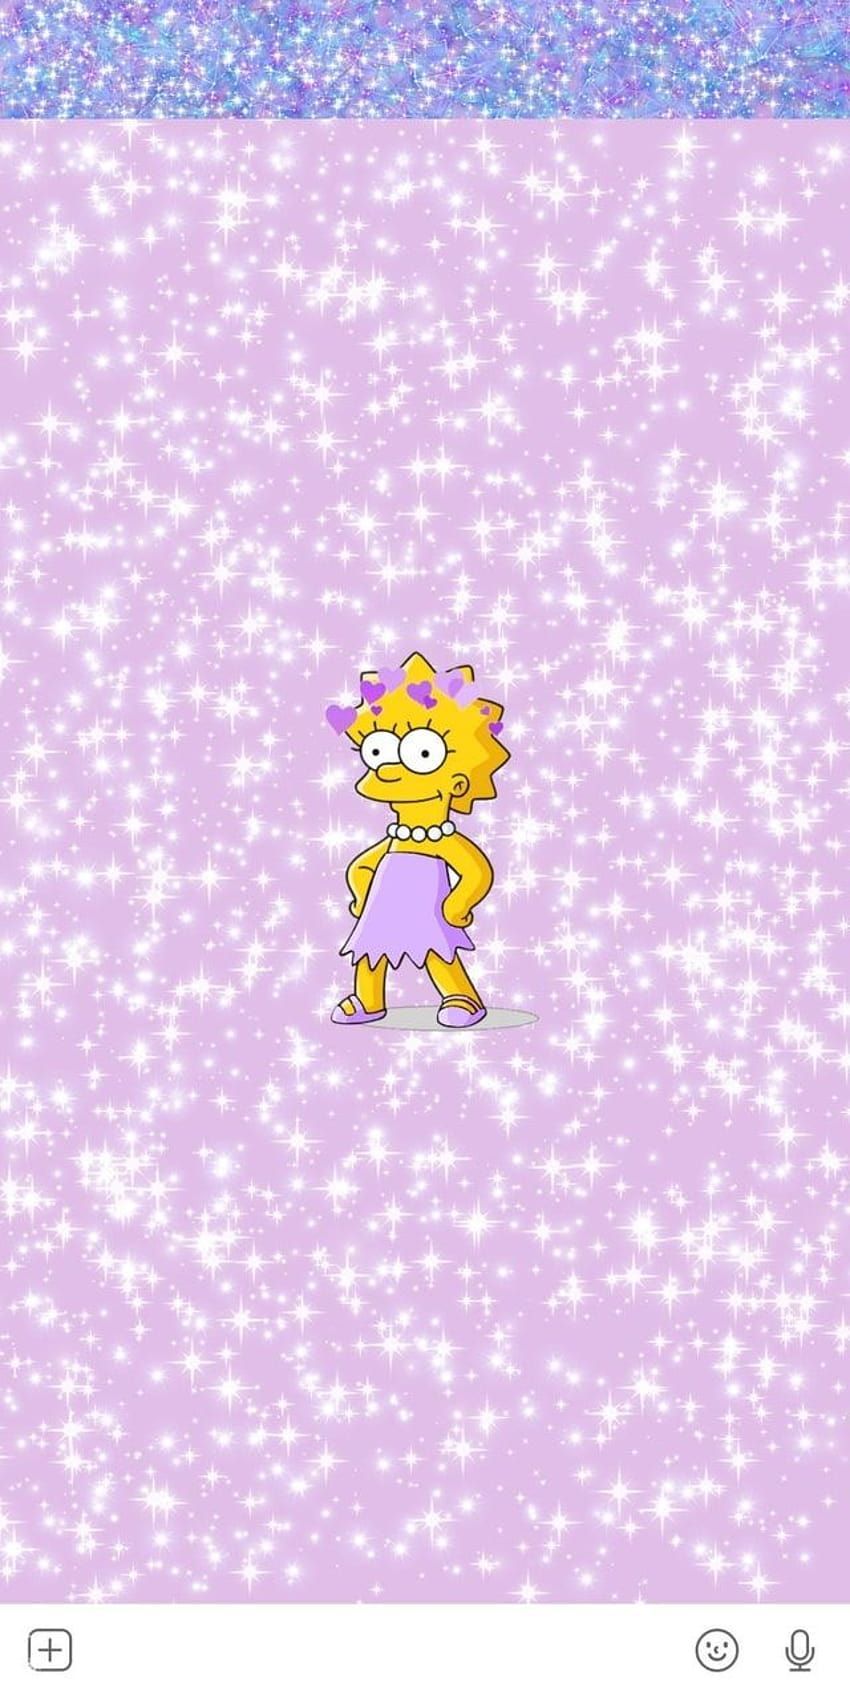 The simpsons in a purple background with glitter - Lisa Simpson